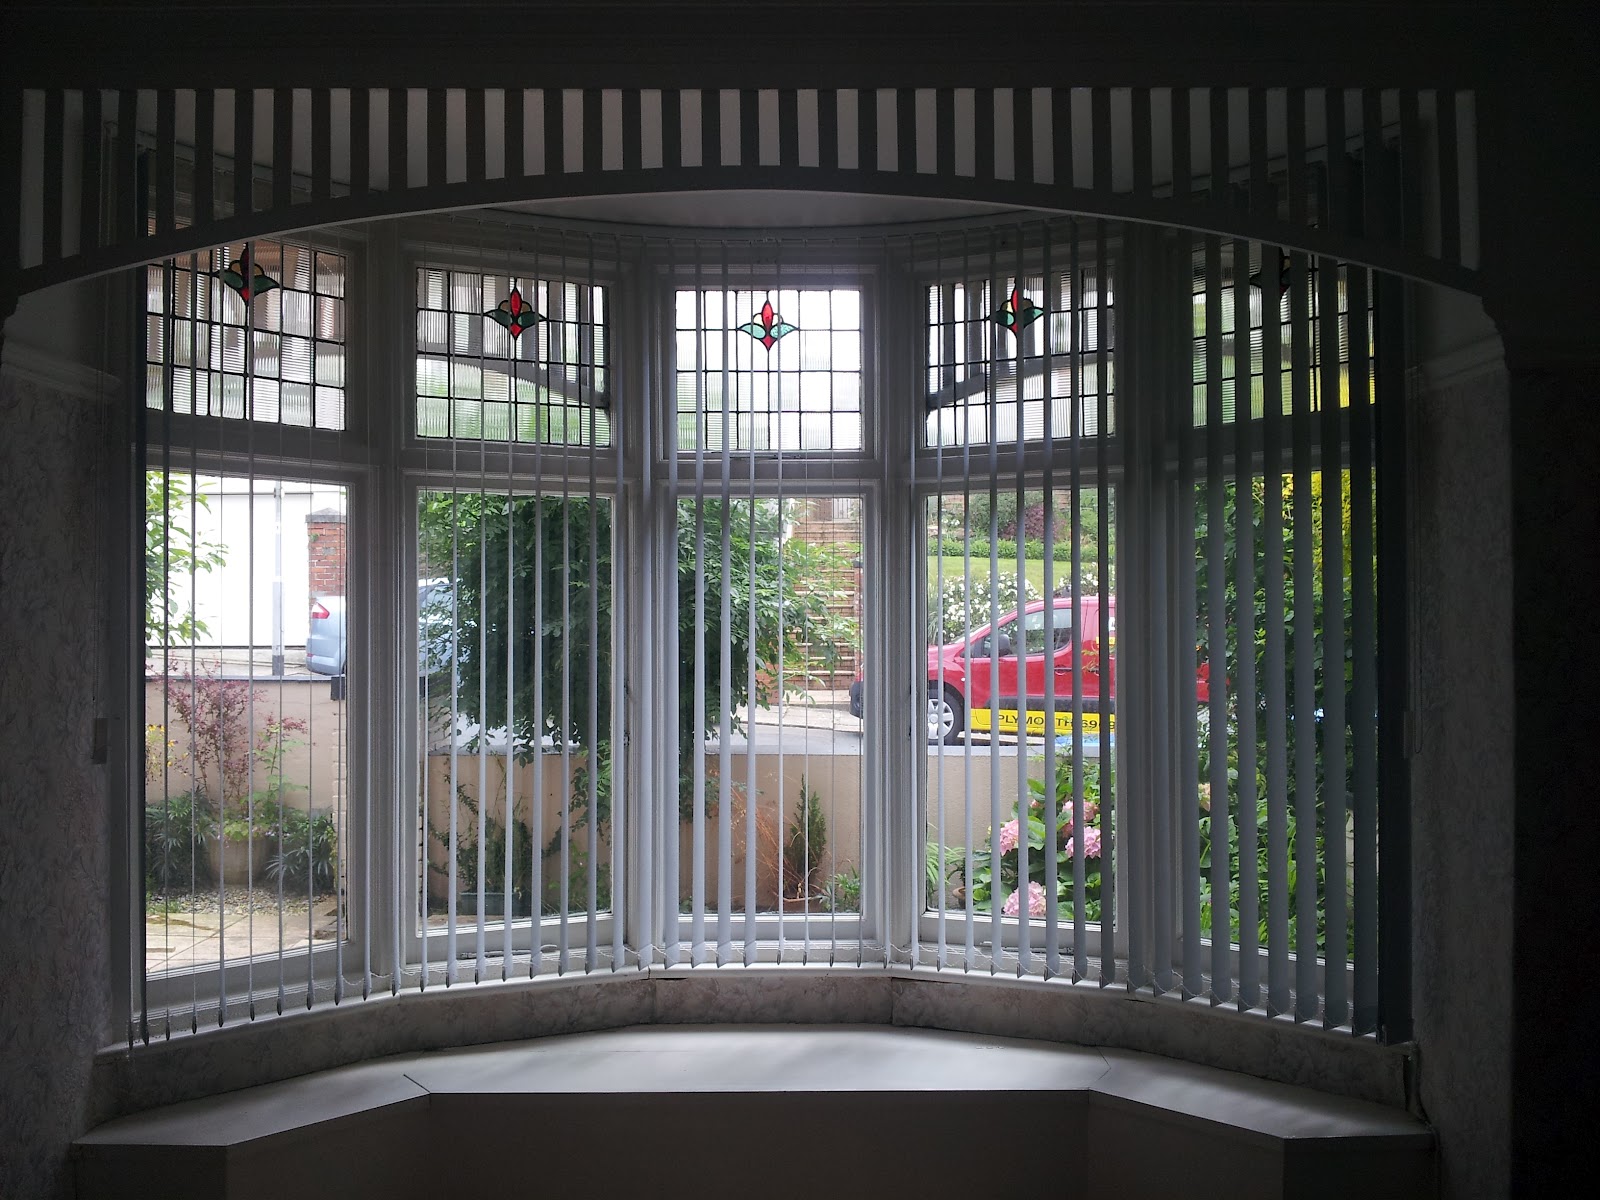 Image 80 of Blinds For A Curved Bay Window